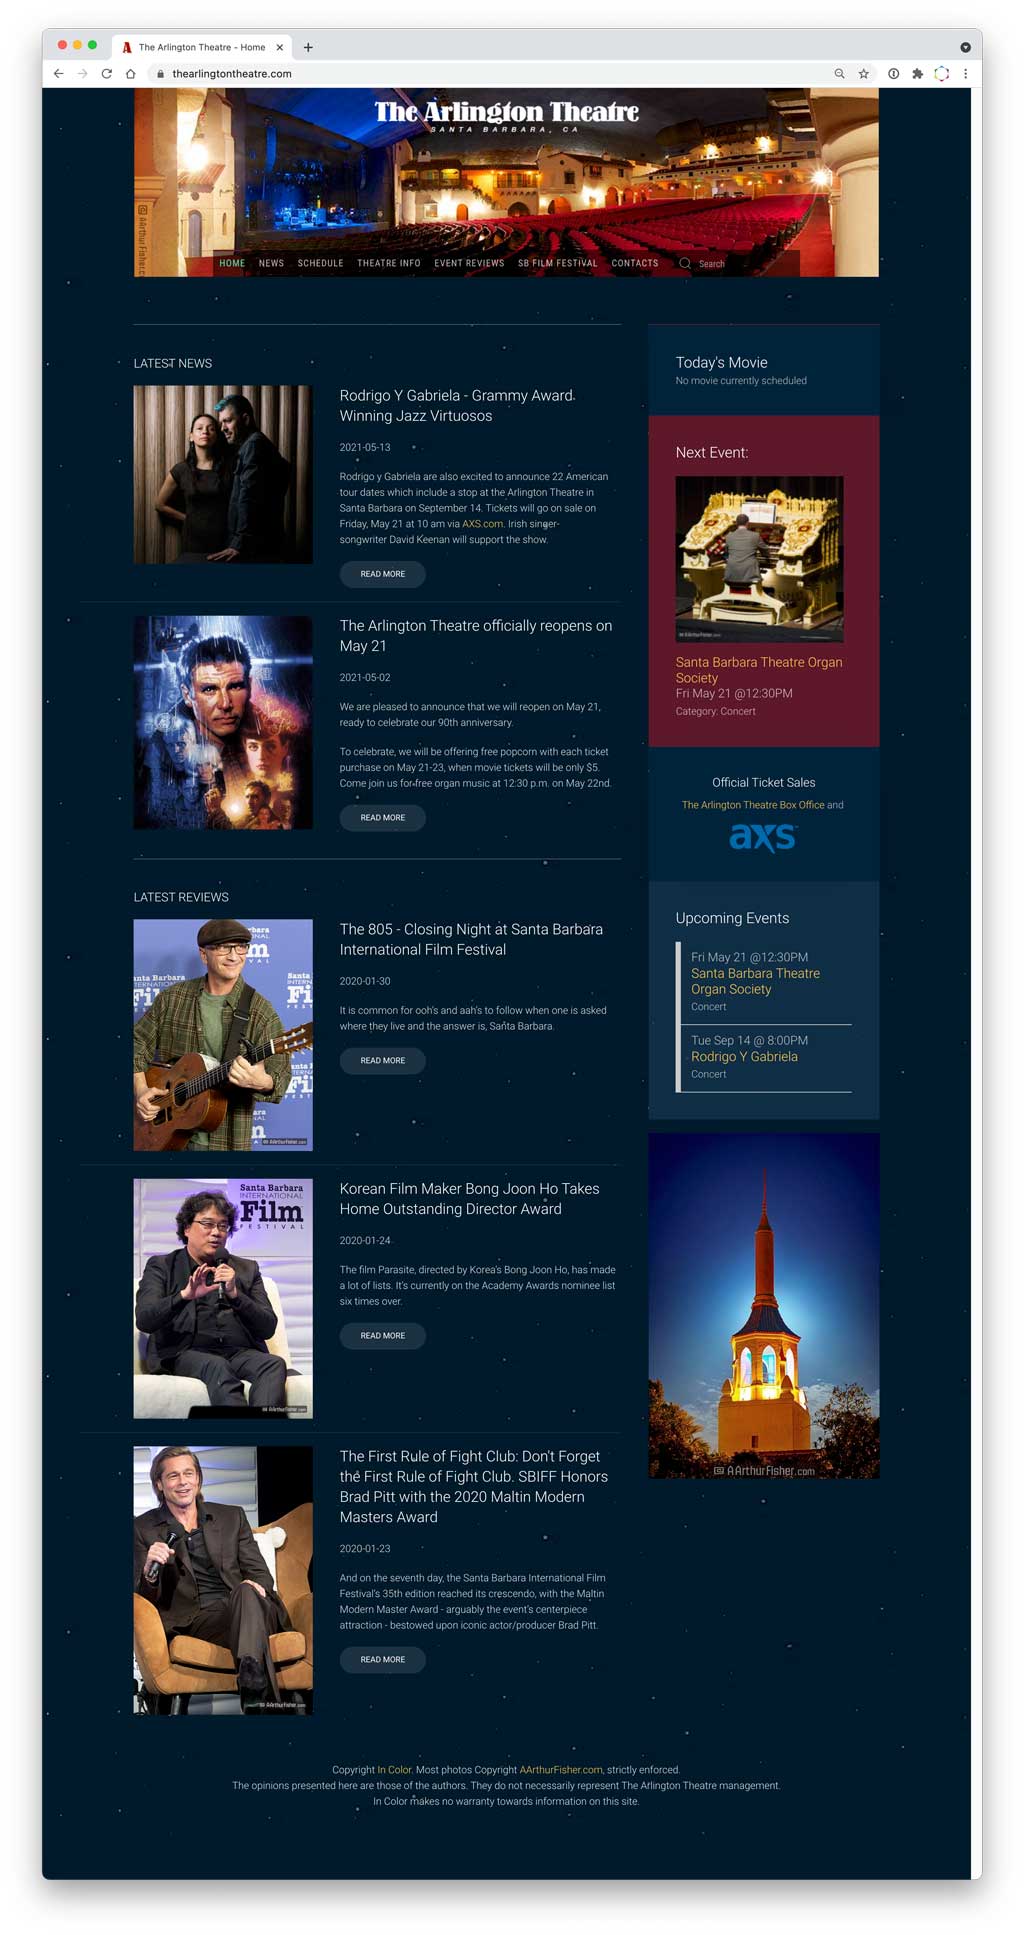 thearlingtontheatre.com Gets Another Facelift